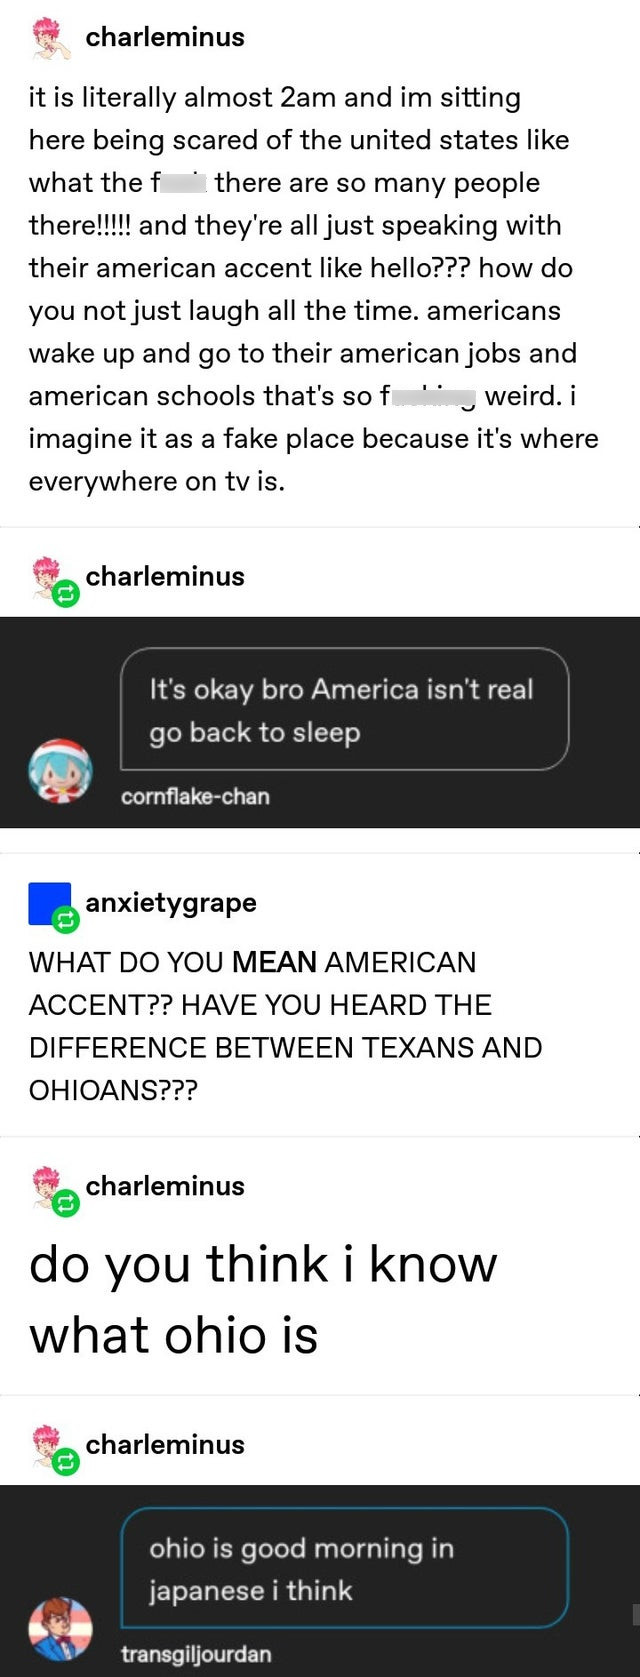 screenshot - charleminus it is literally almost 2am and im sitting here being scared of the united states what the f there are so many people there!!!!! and they're all just speaking with their american accent hello??? how do you not just laugh all the ti